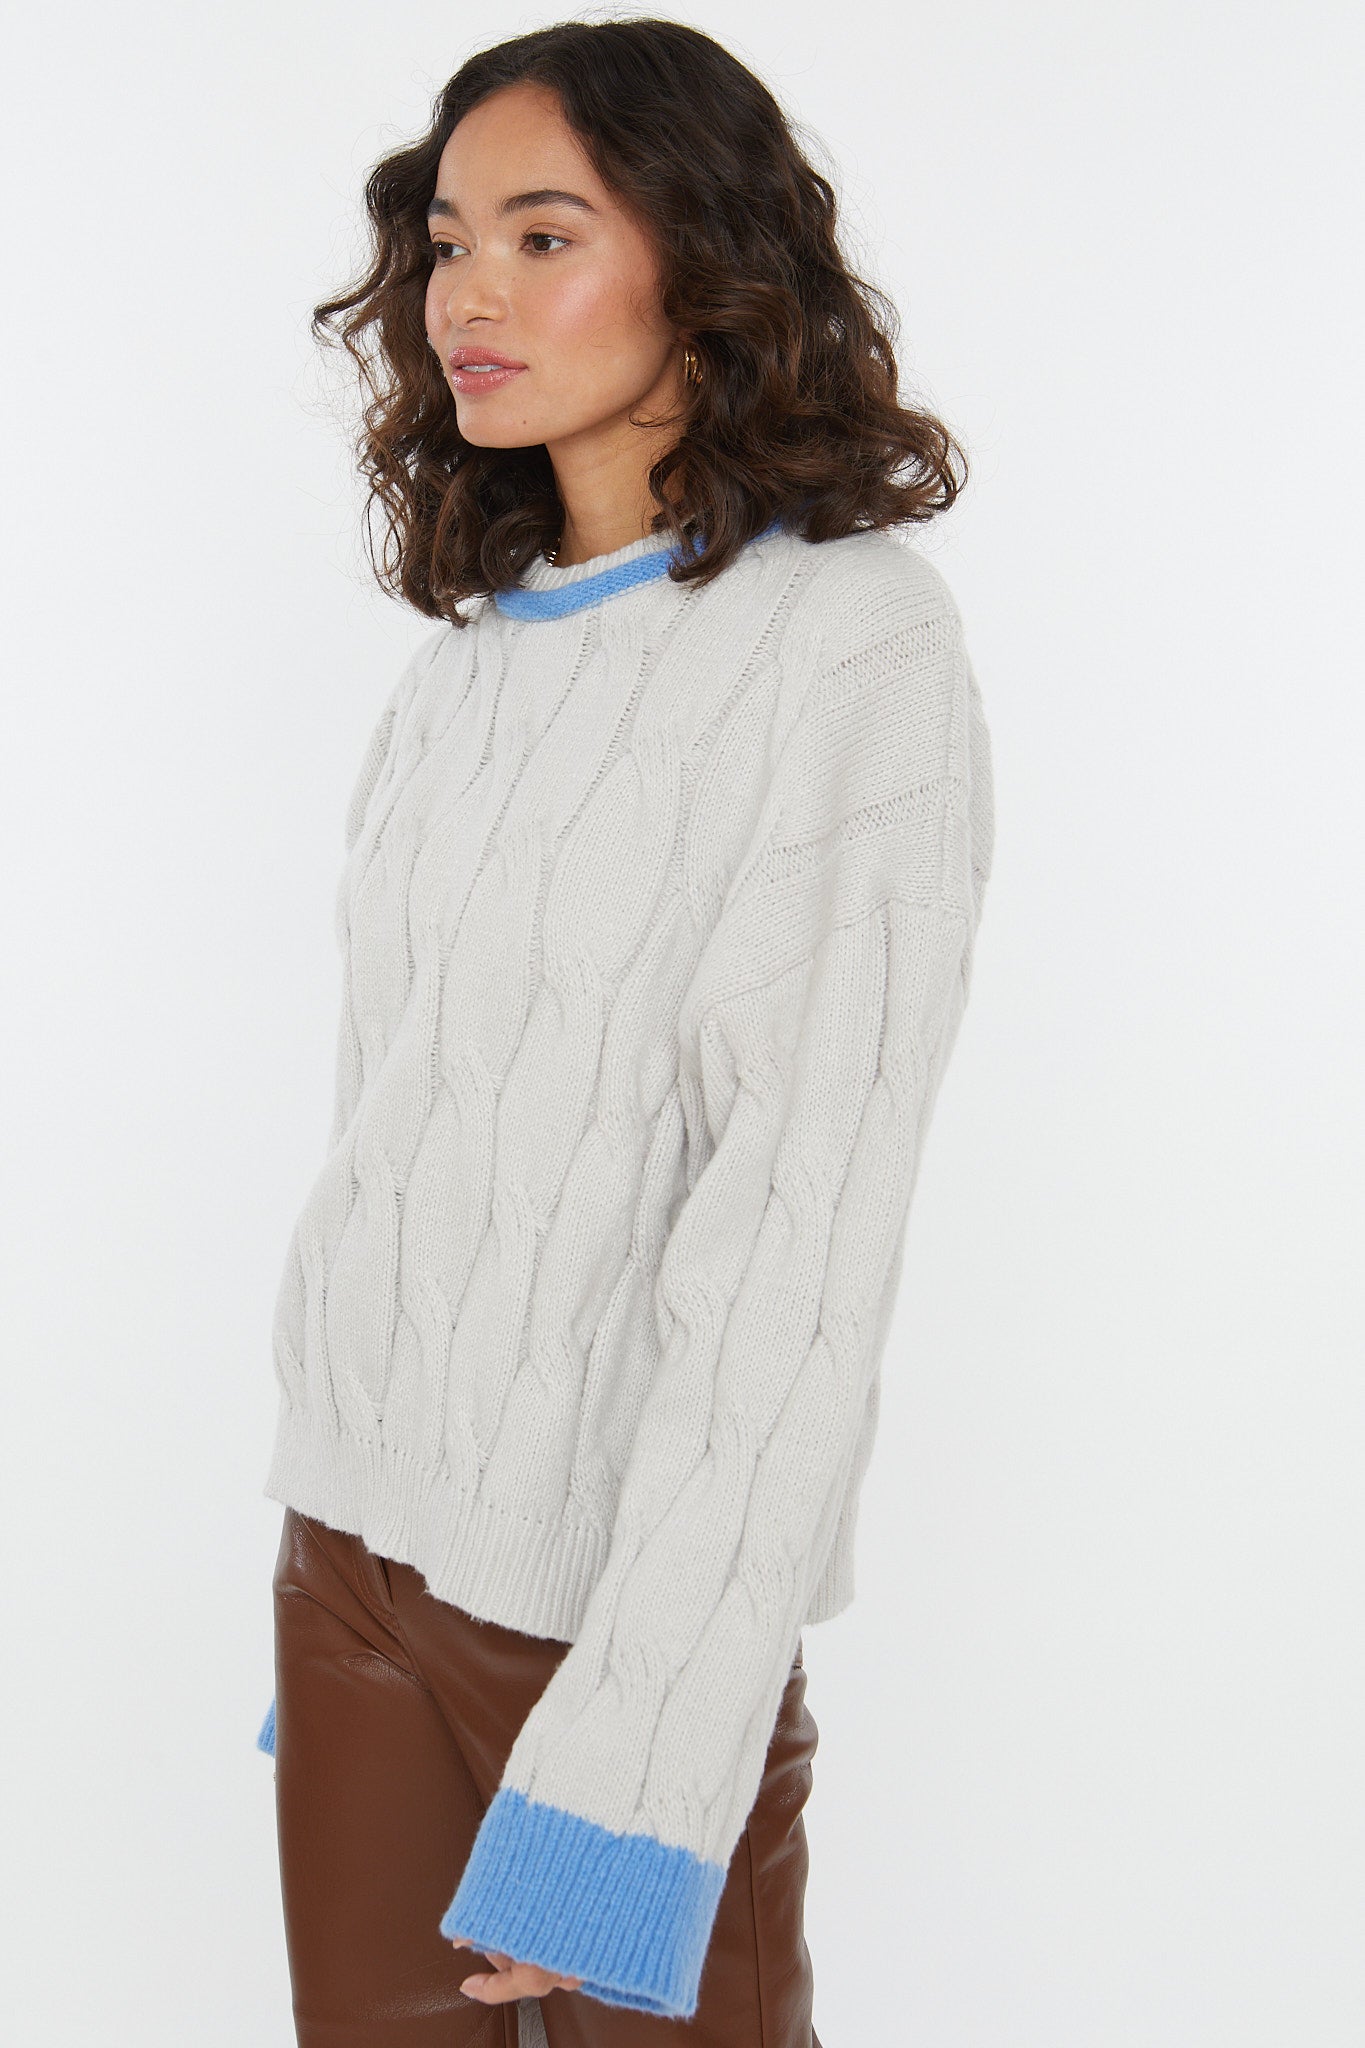 cable knit sweater, oversized sweater, light grey color with blue accent color details, cropped length